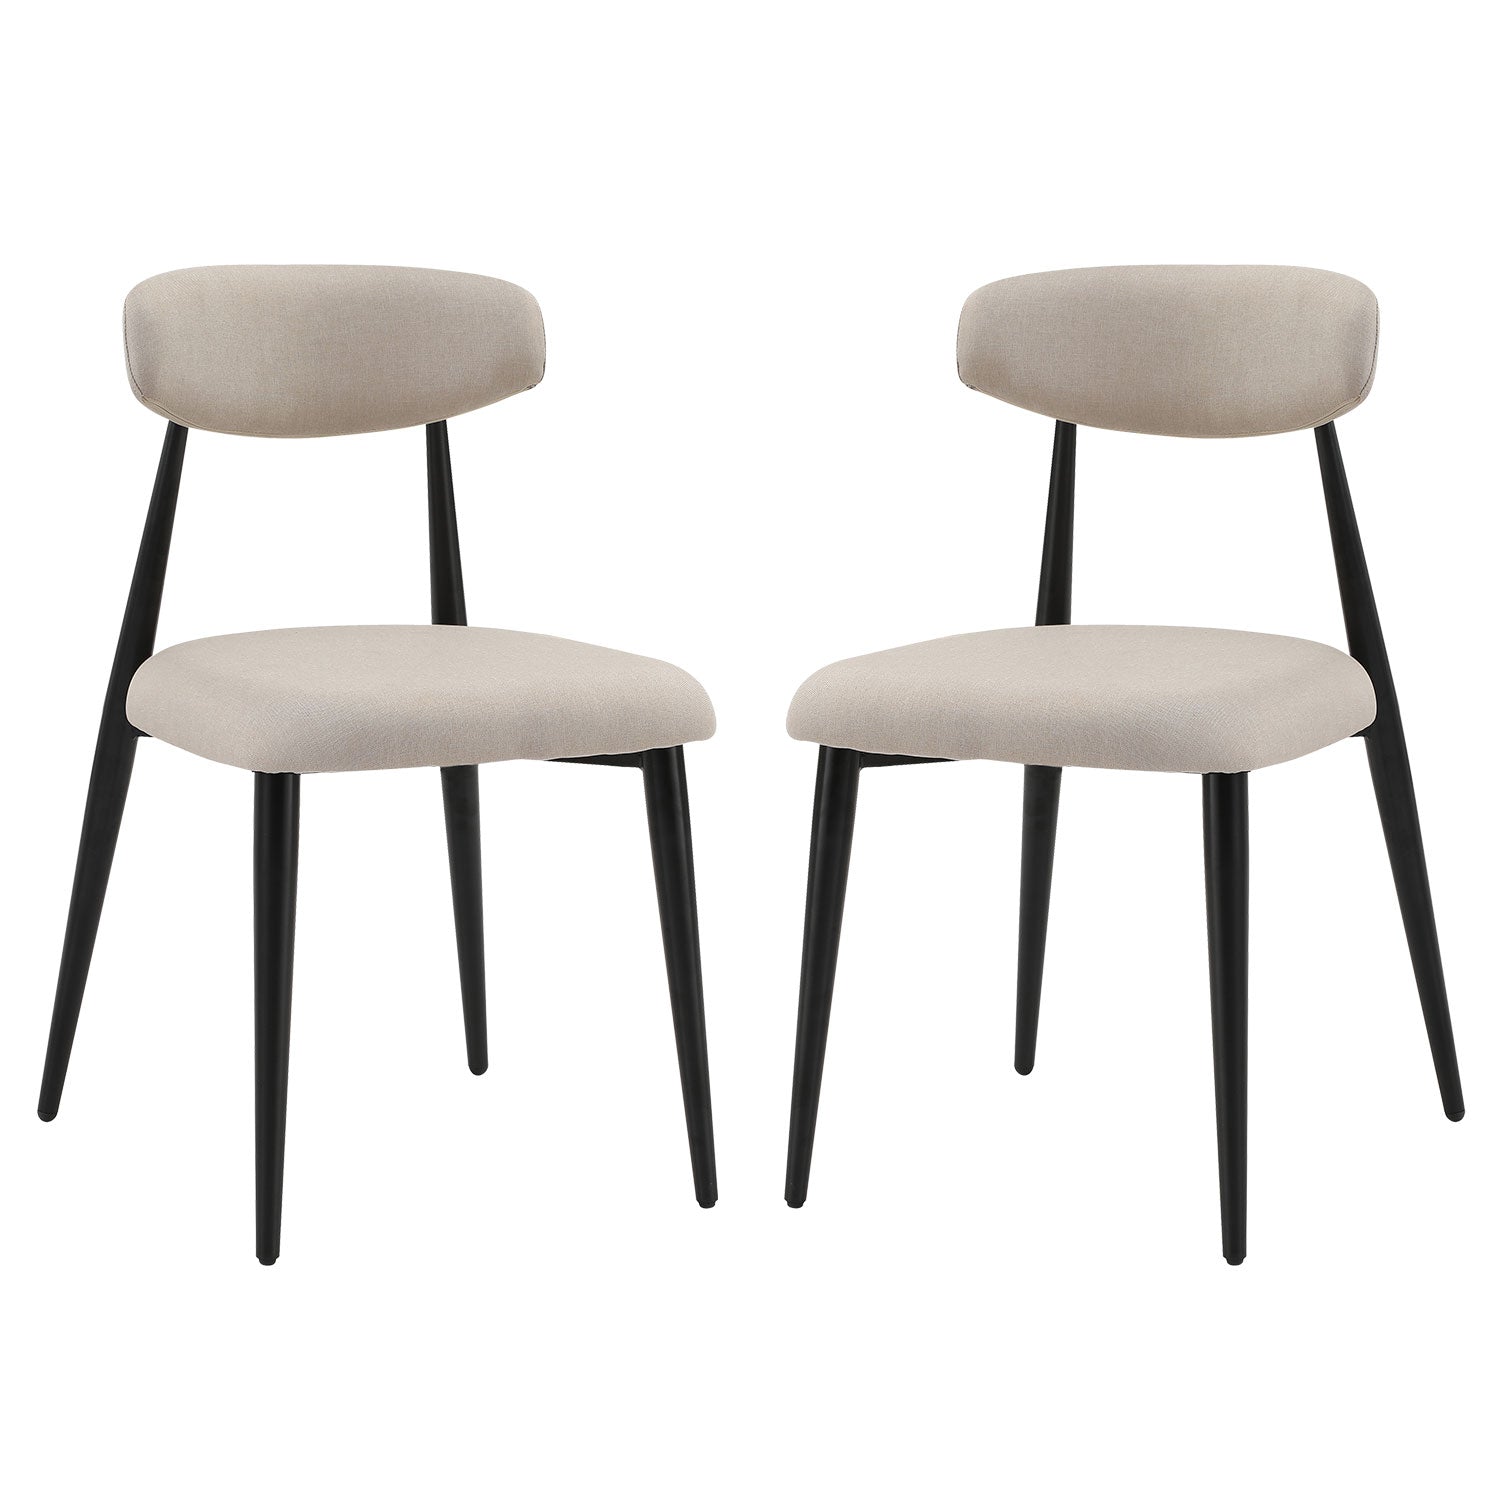 Dining Chairs , Upholstered Chairs with Metal Legs for Kitchen Dining Room